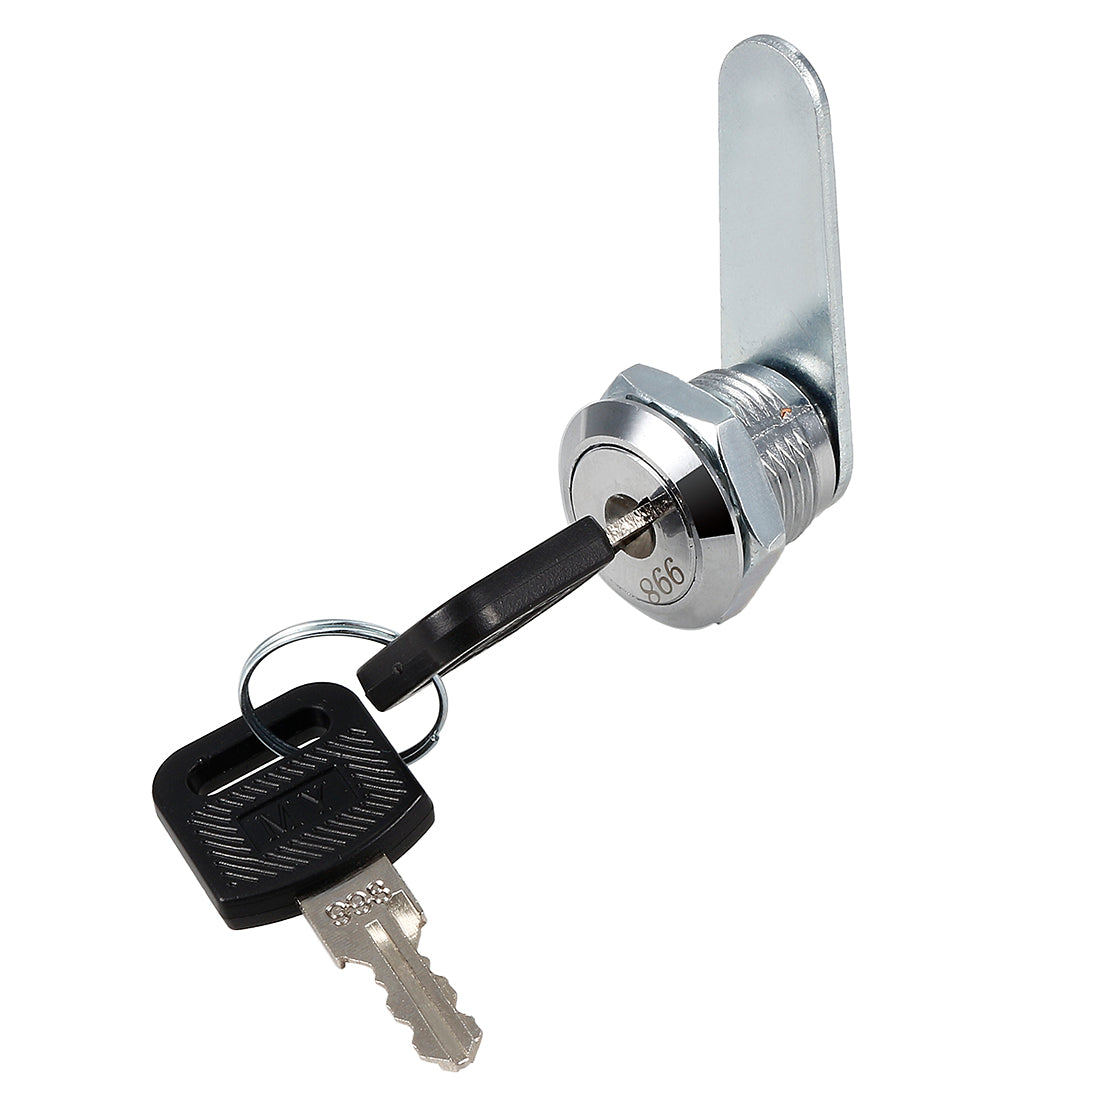 uxcell Uxcell 5/8" Cylinder Length Zinc Alloy Chrome Plated Cam Lock w Key, Keyed Different